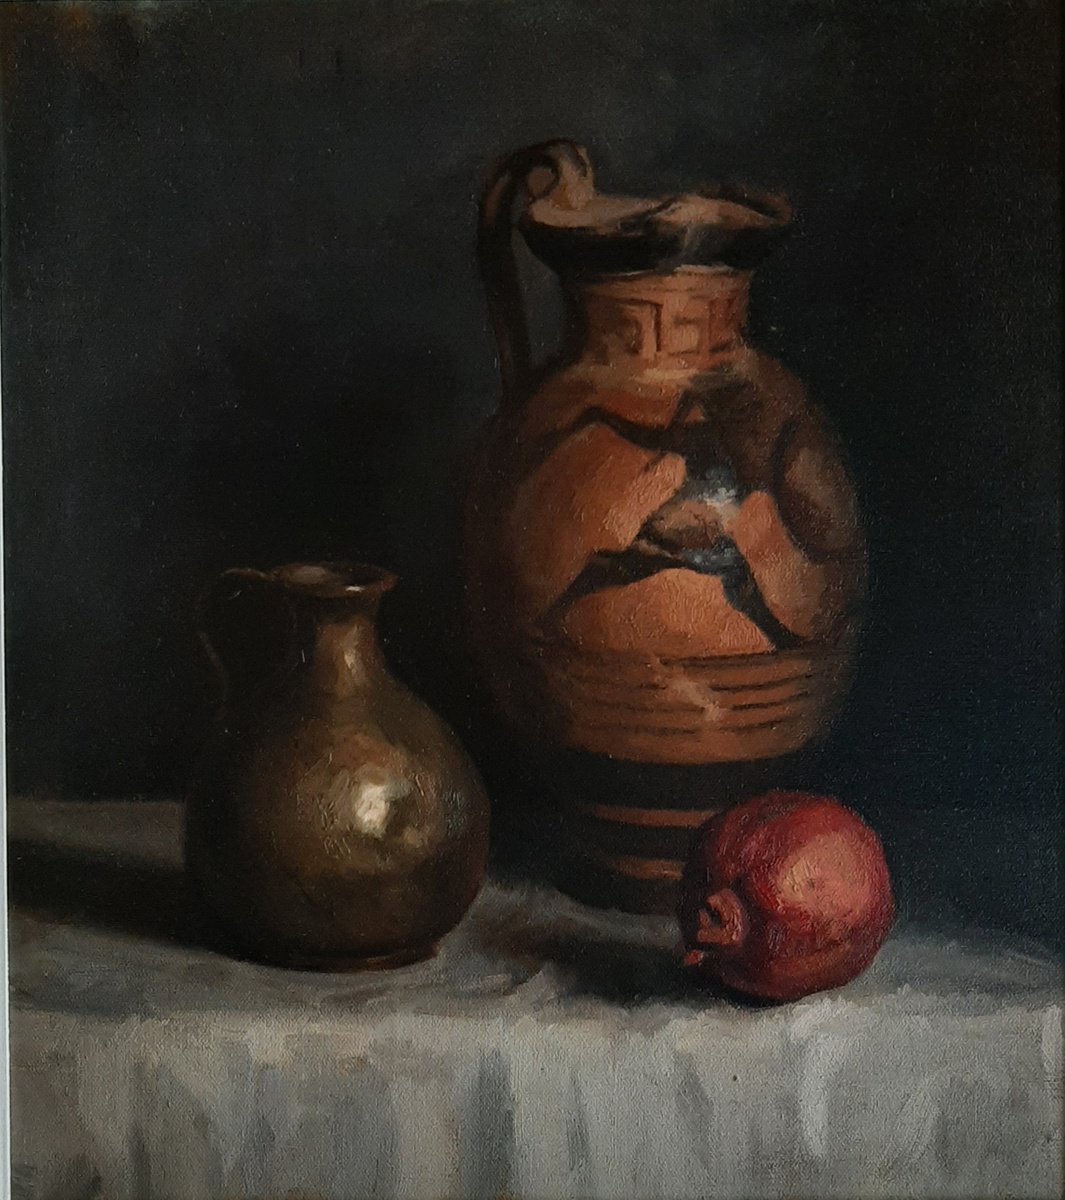 Still life with a greek vase by Marco Fariello